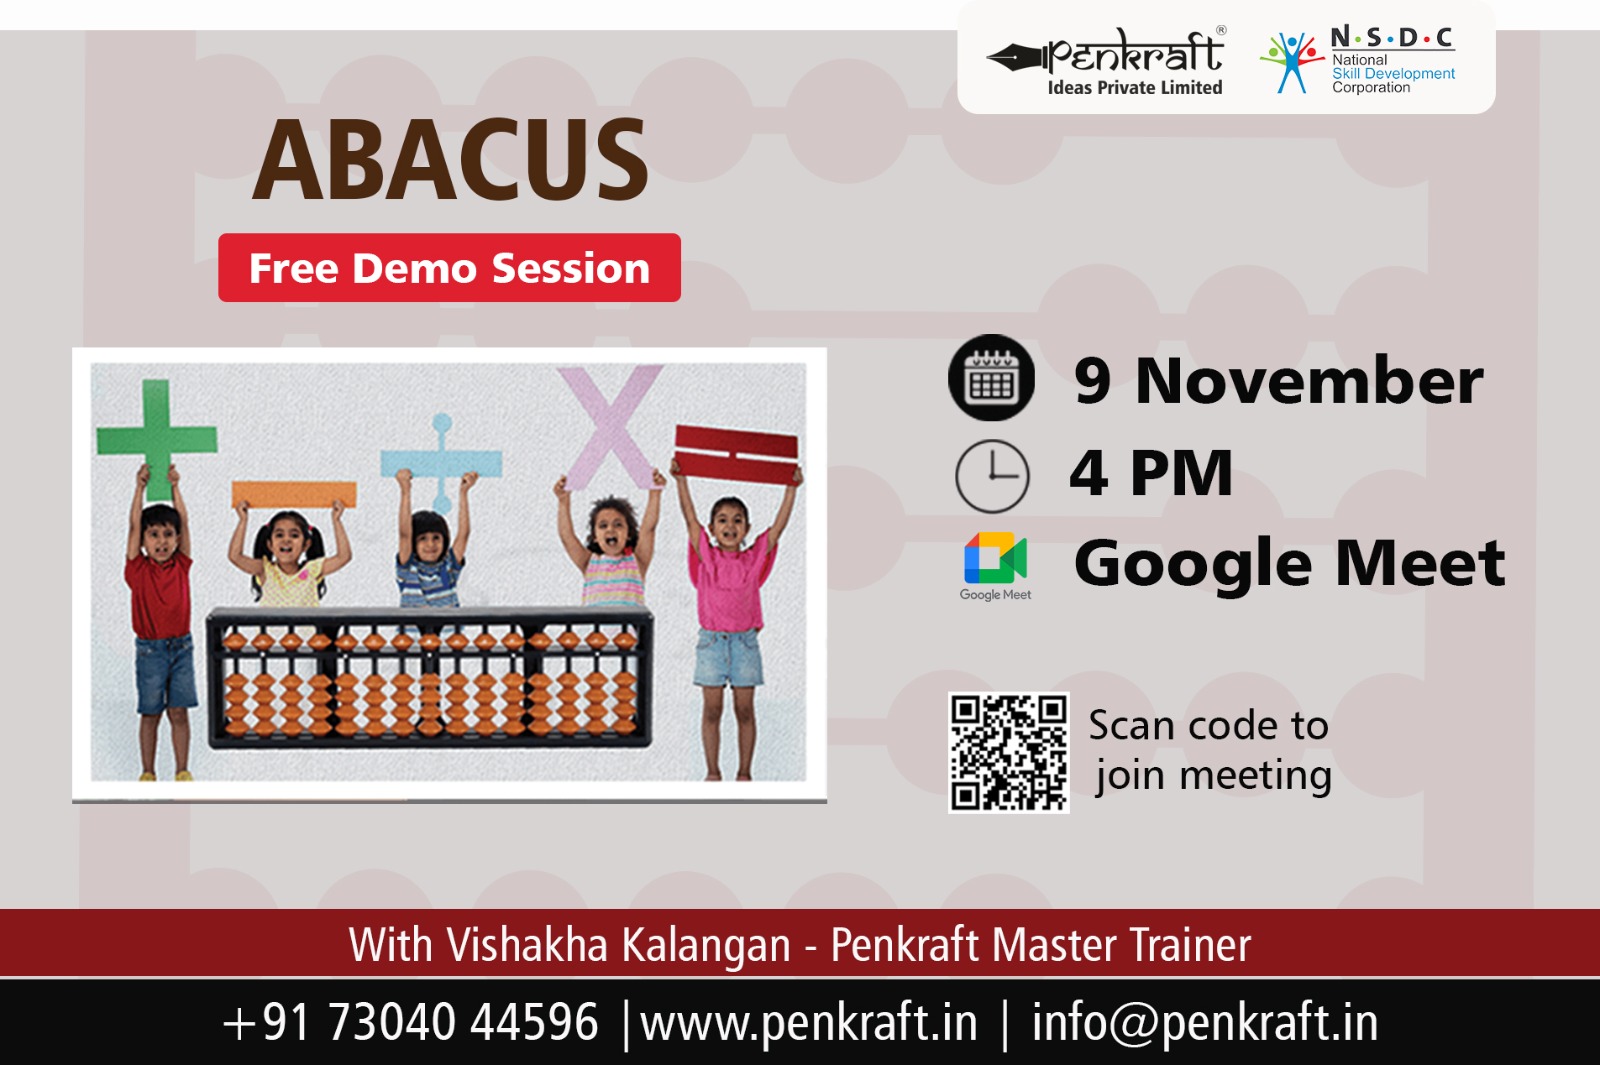 ABACUS FREE DEMO SESSION